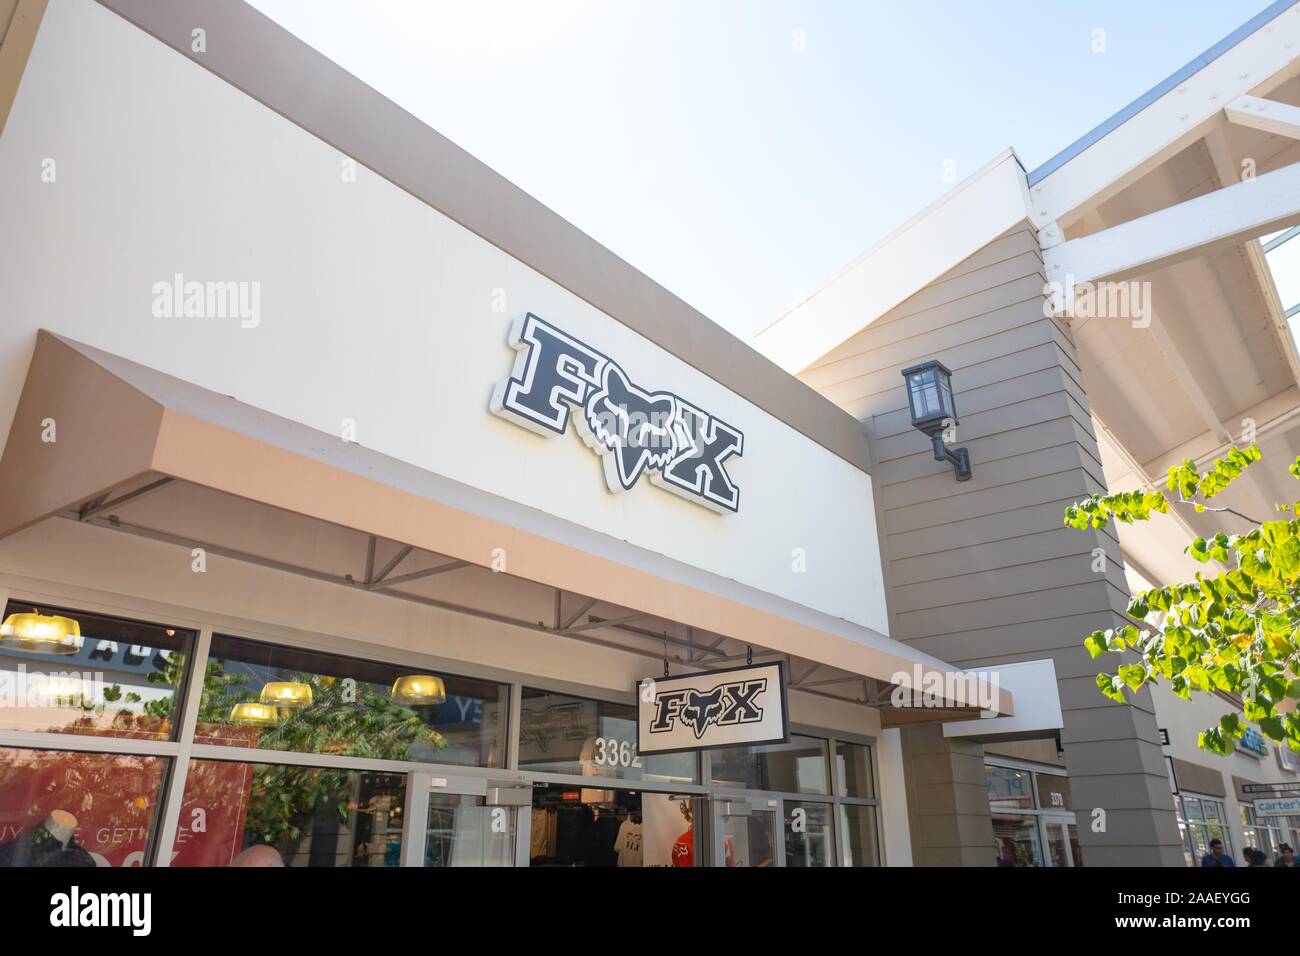 Facade with logo at retail store for extreme sports clothing company Fox in Livermore, California, September 2, 2019. () Stock Photo